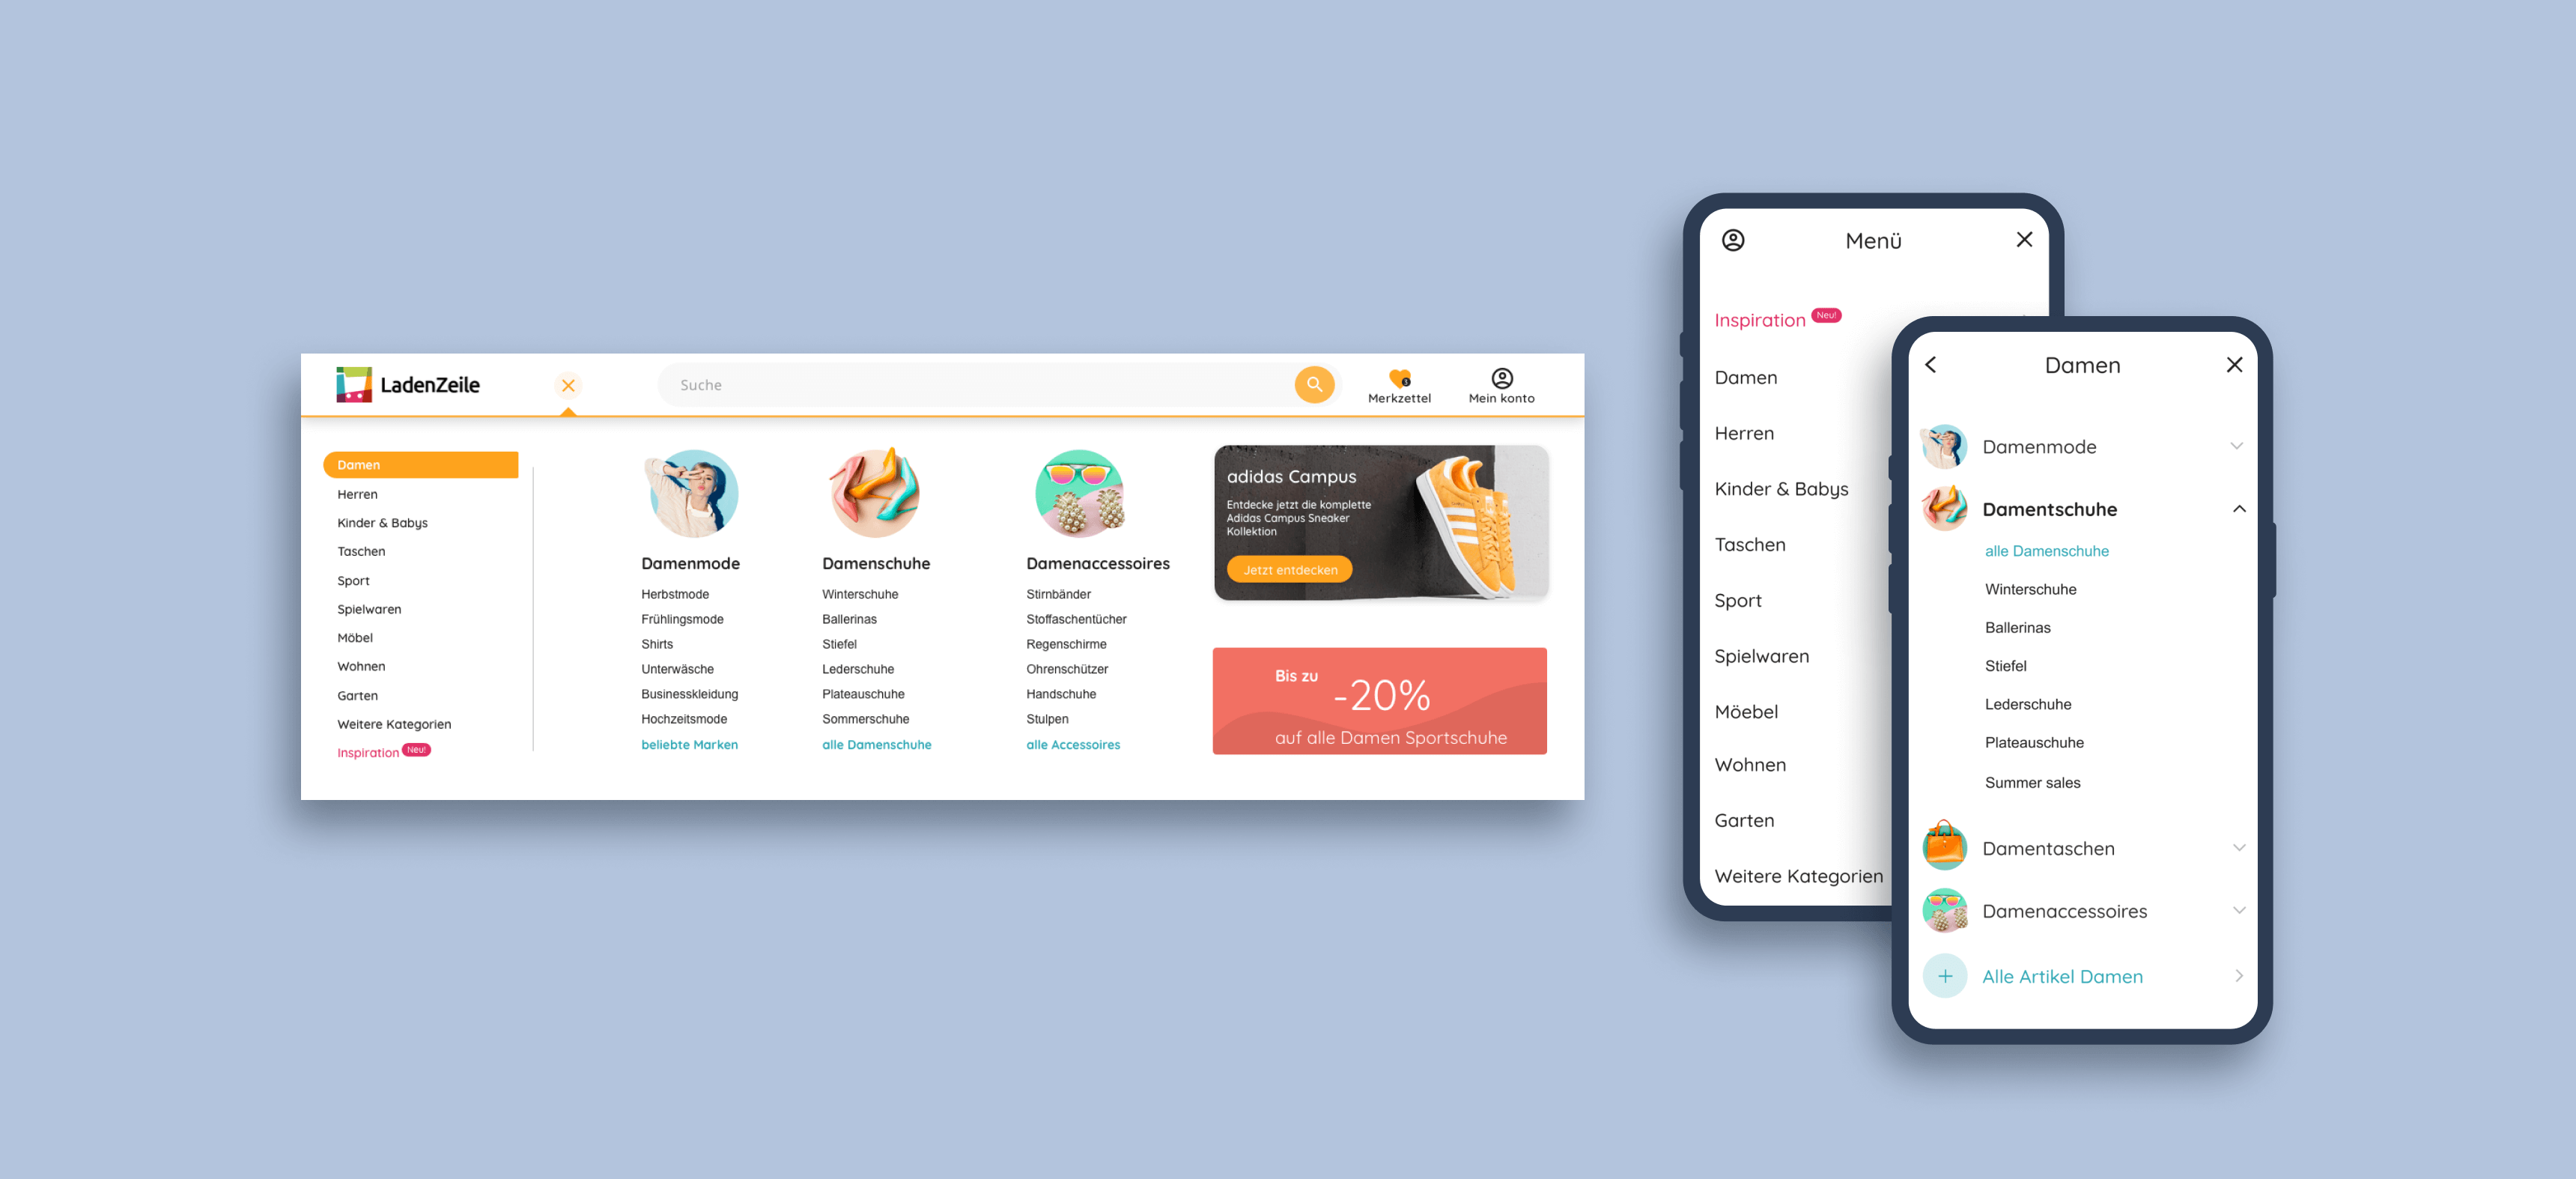 Ladenzeile's main menu redesign for desktop and mobile